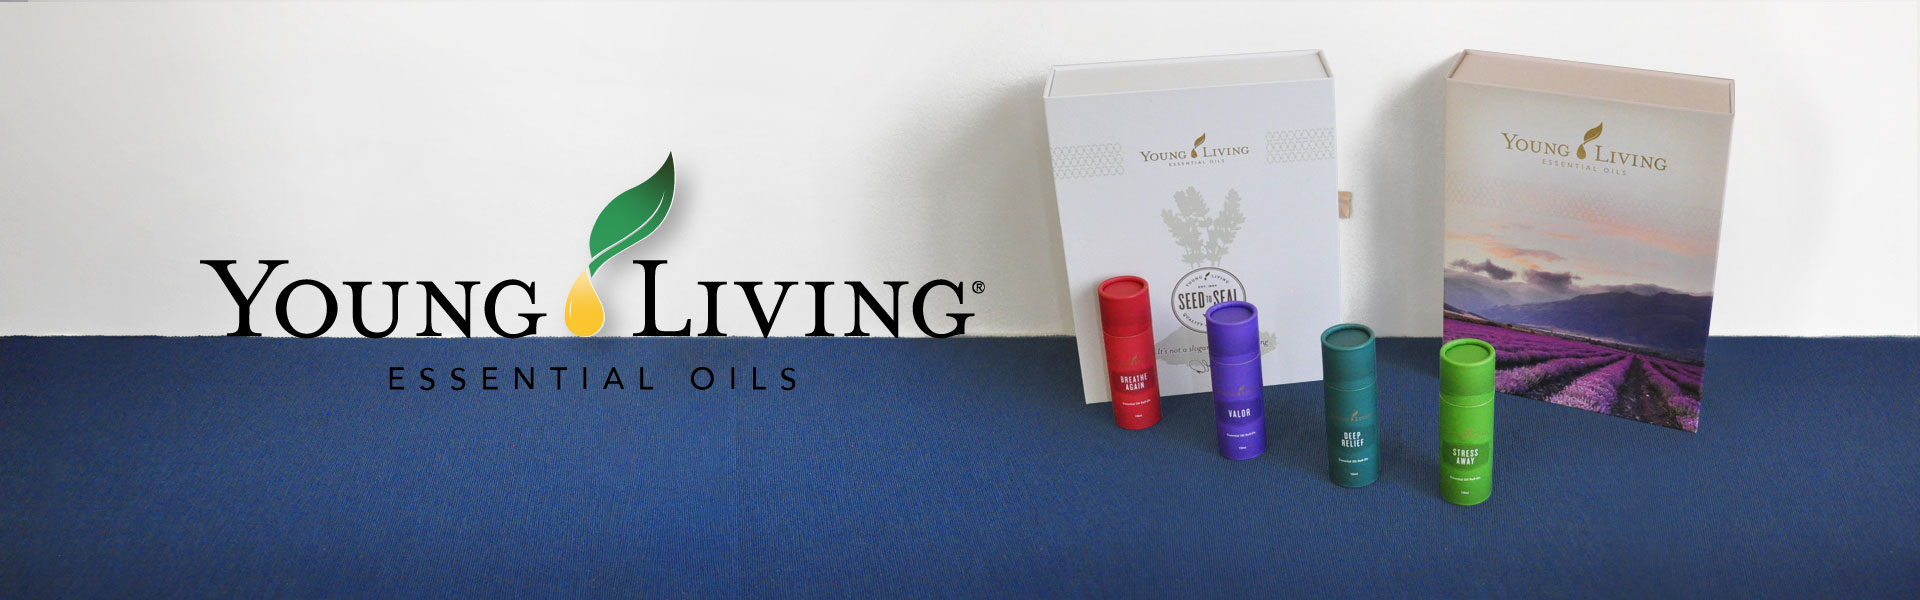 Young Living header